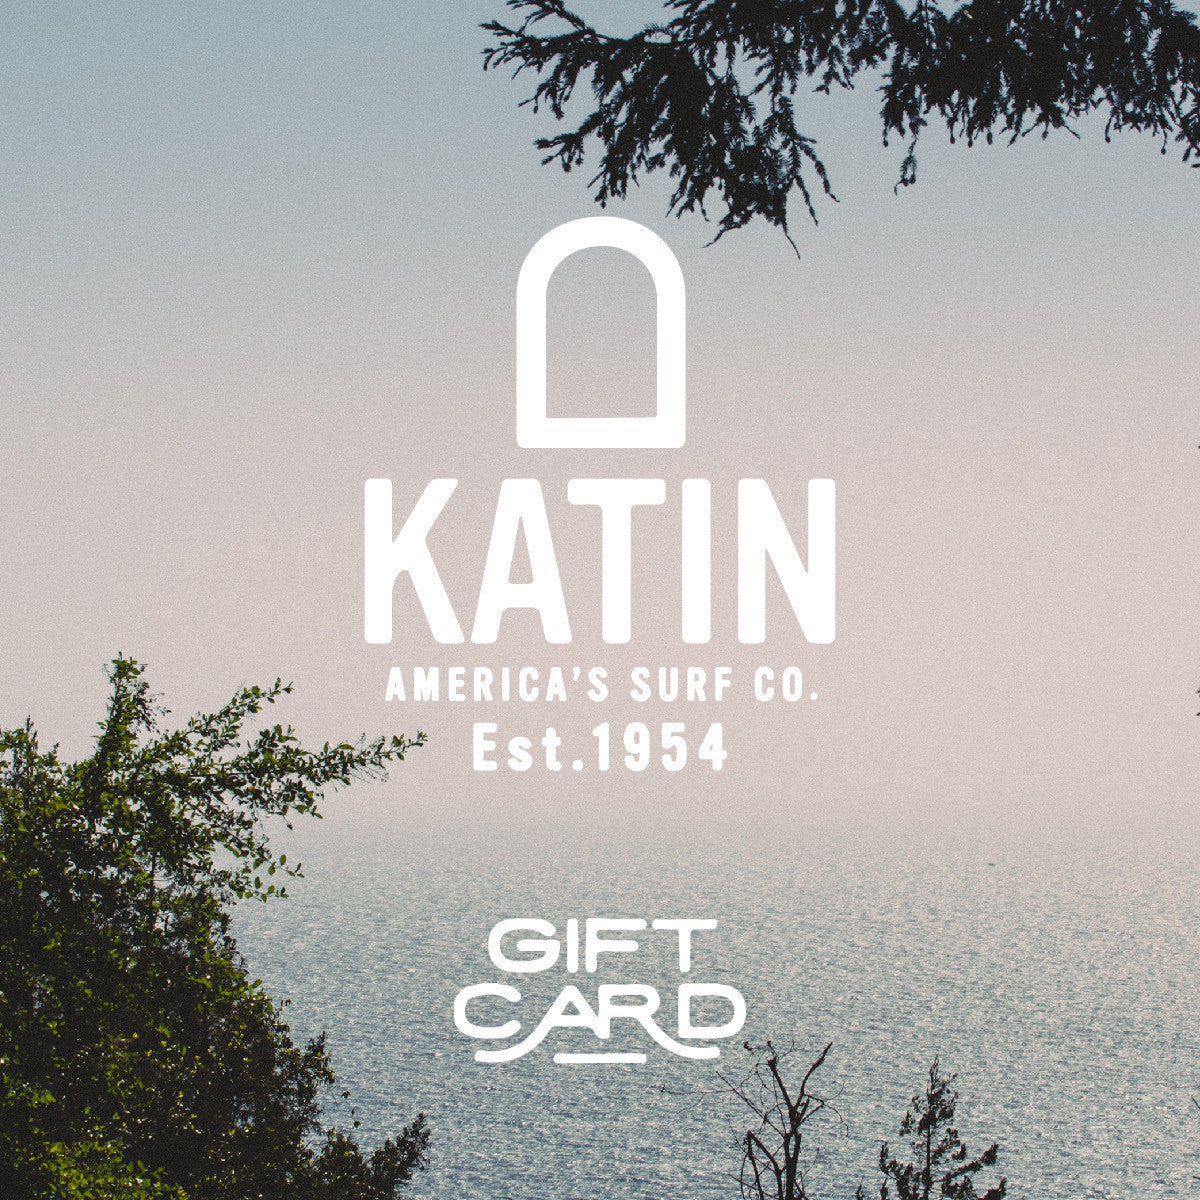 Last Minute Shopping? Snag Katin E-Gift Cards Now